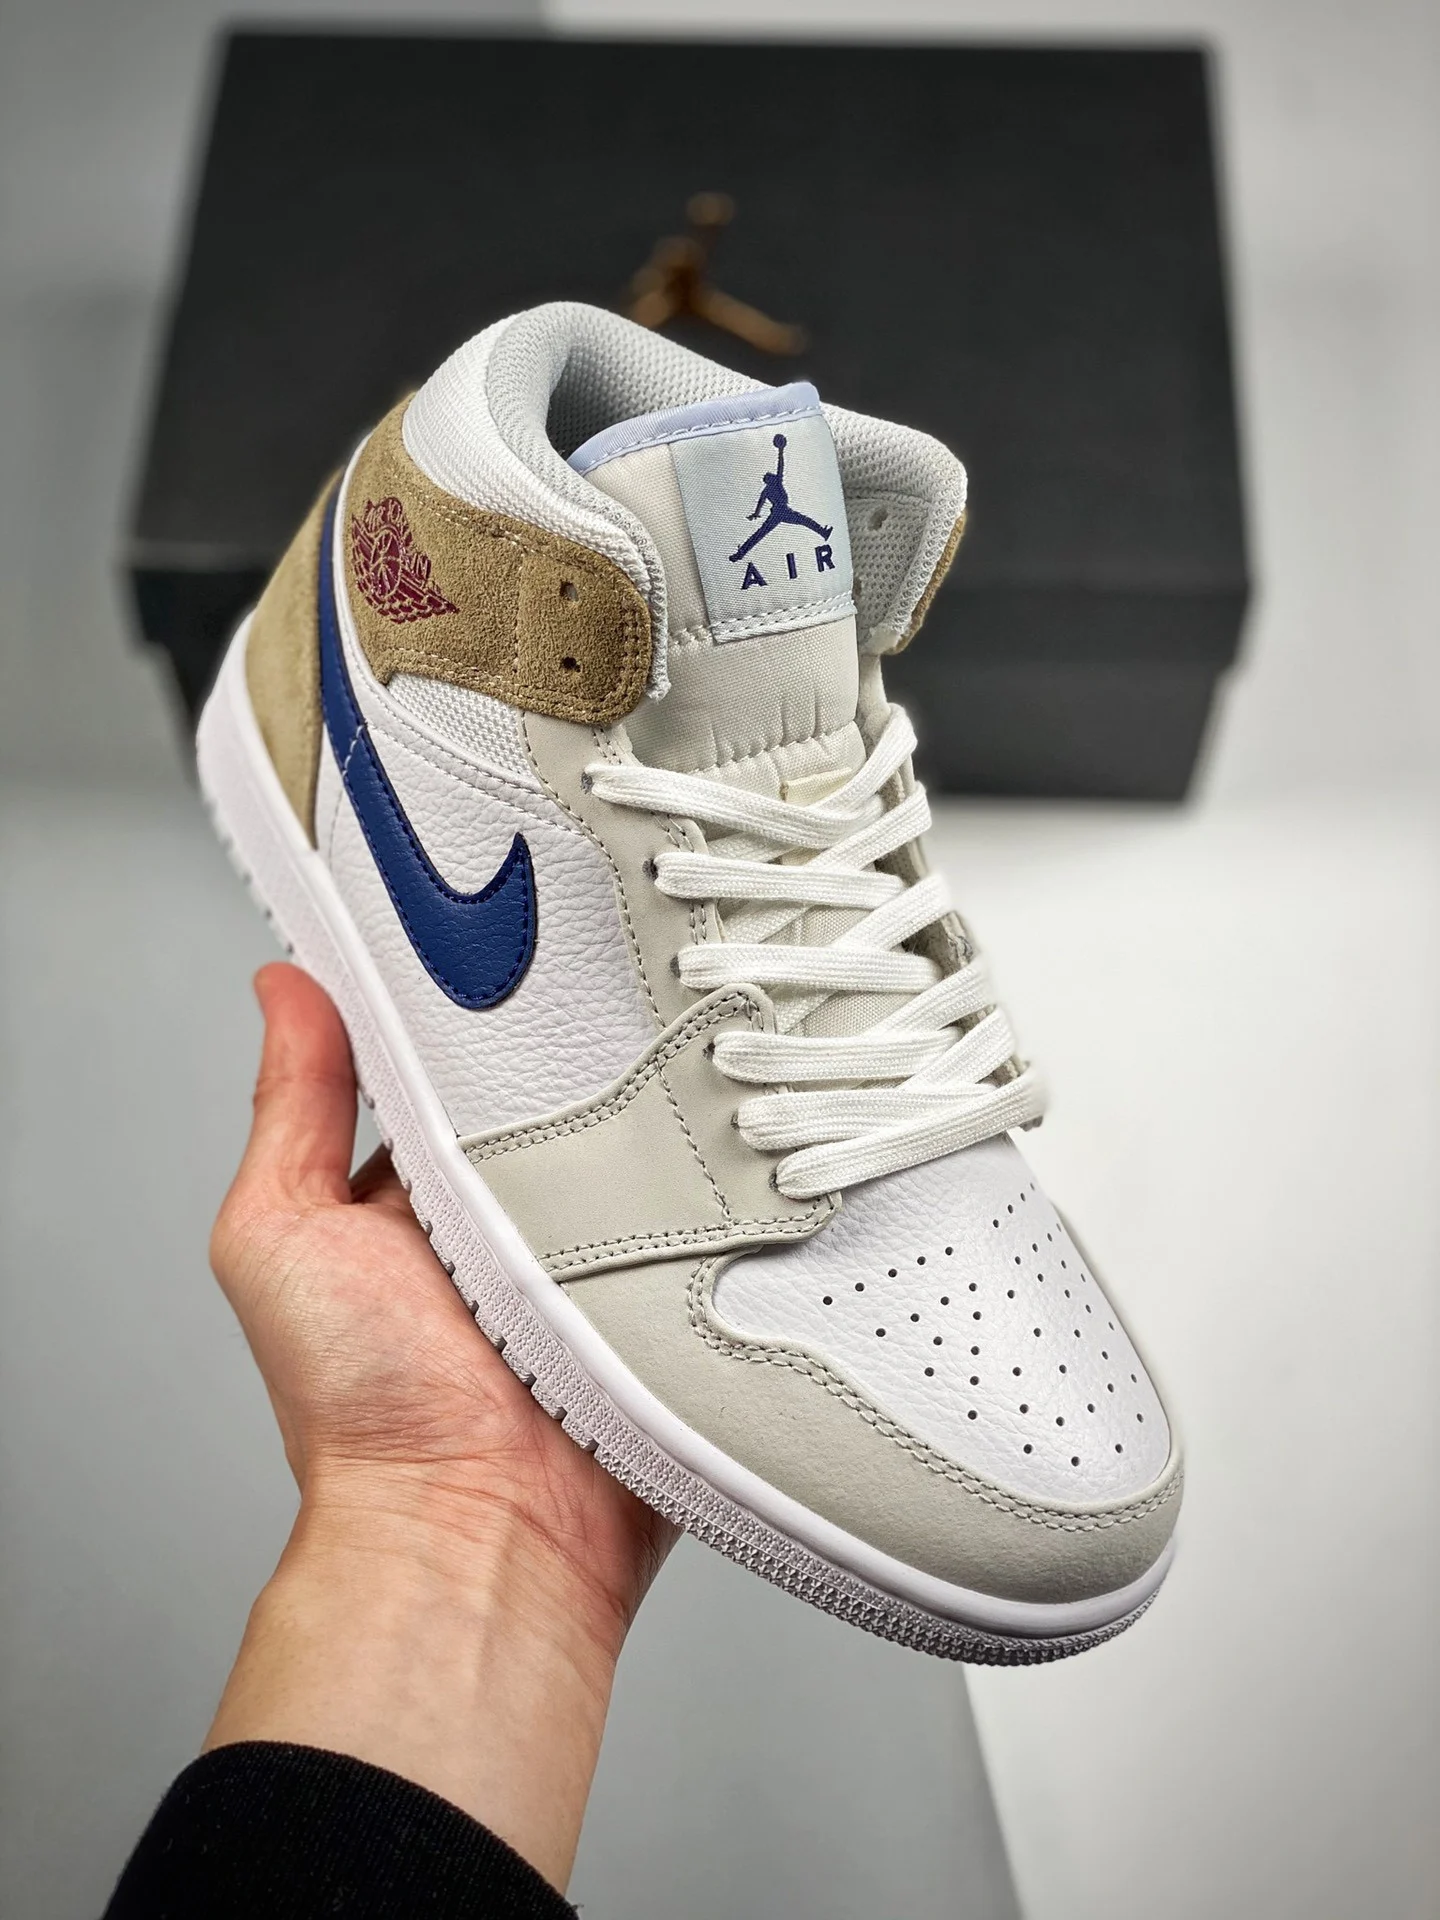 Air Jordan 1 Mid Navy Swooshes and Tan Suede DO6726-100 For Sale